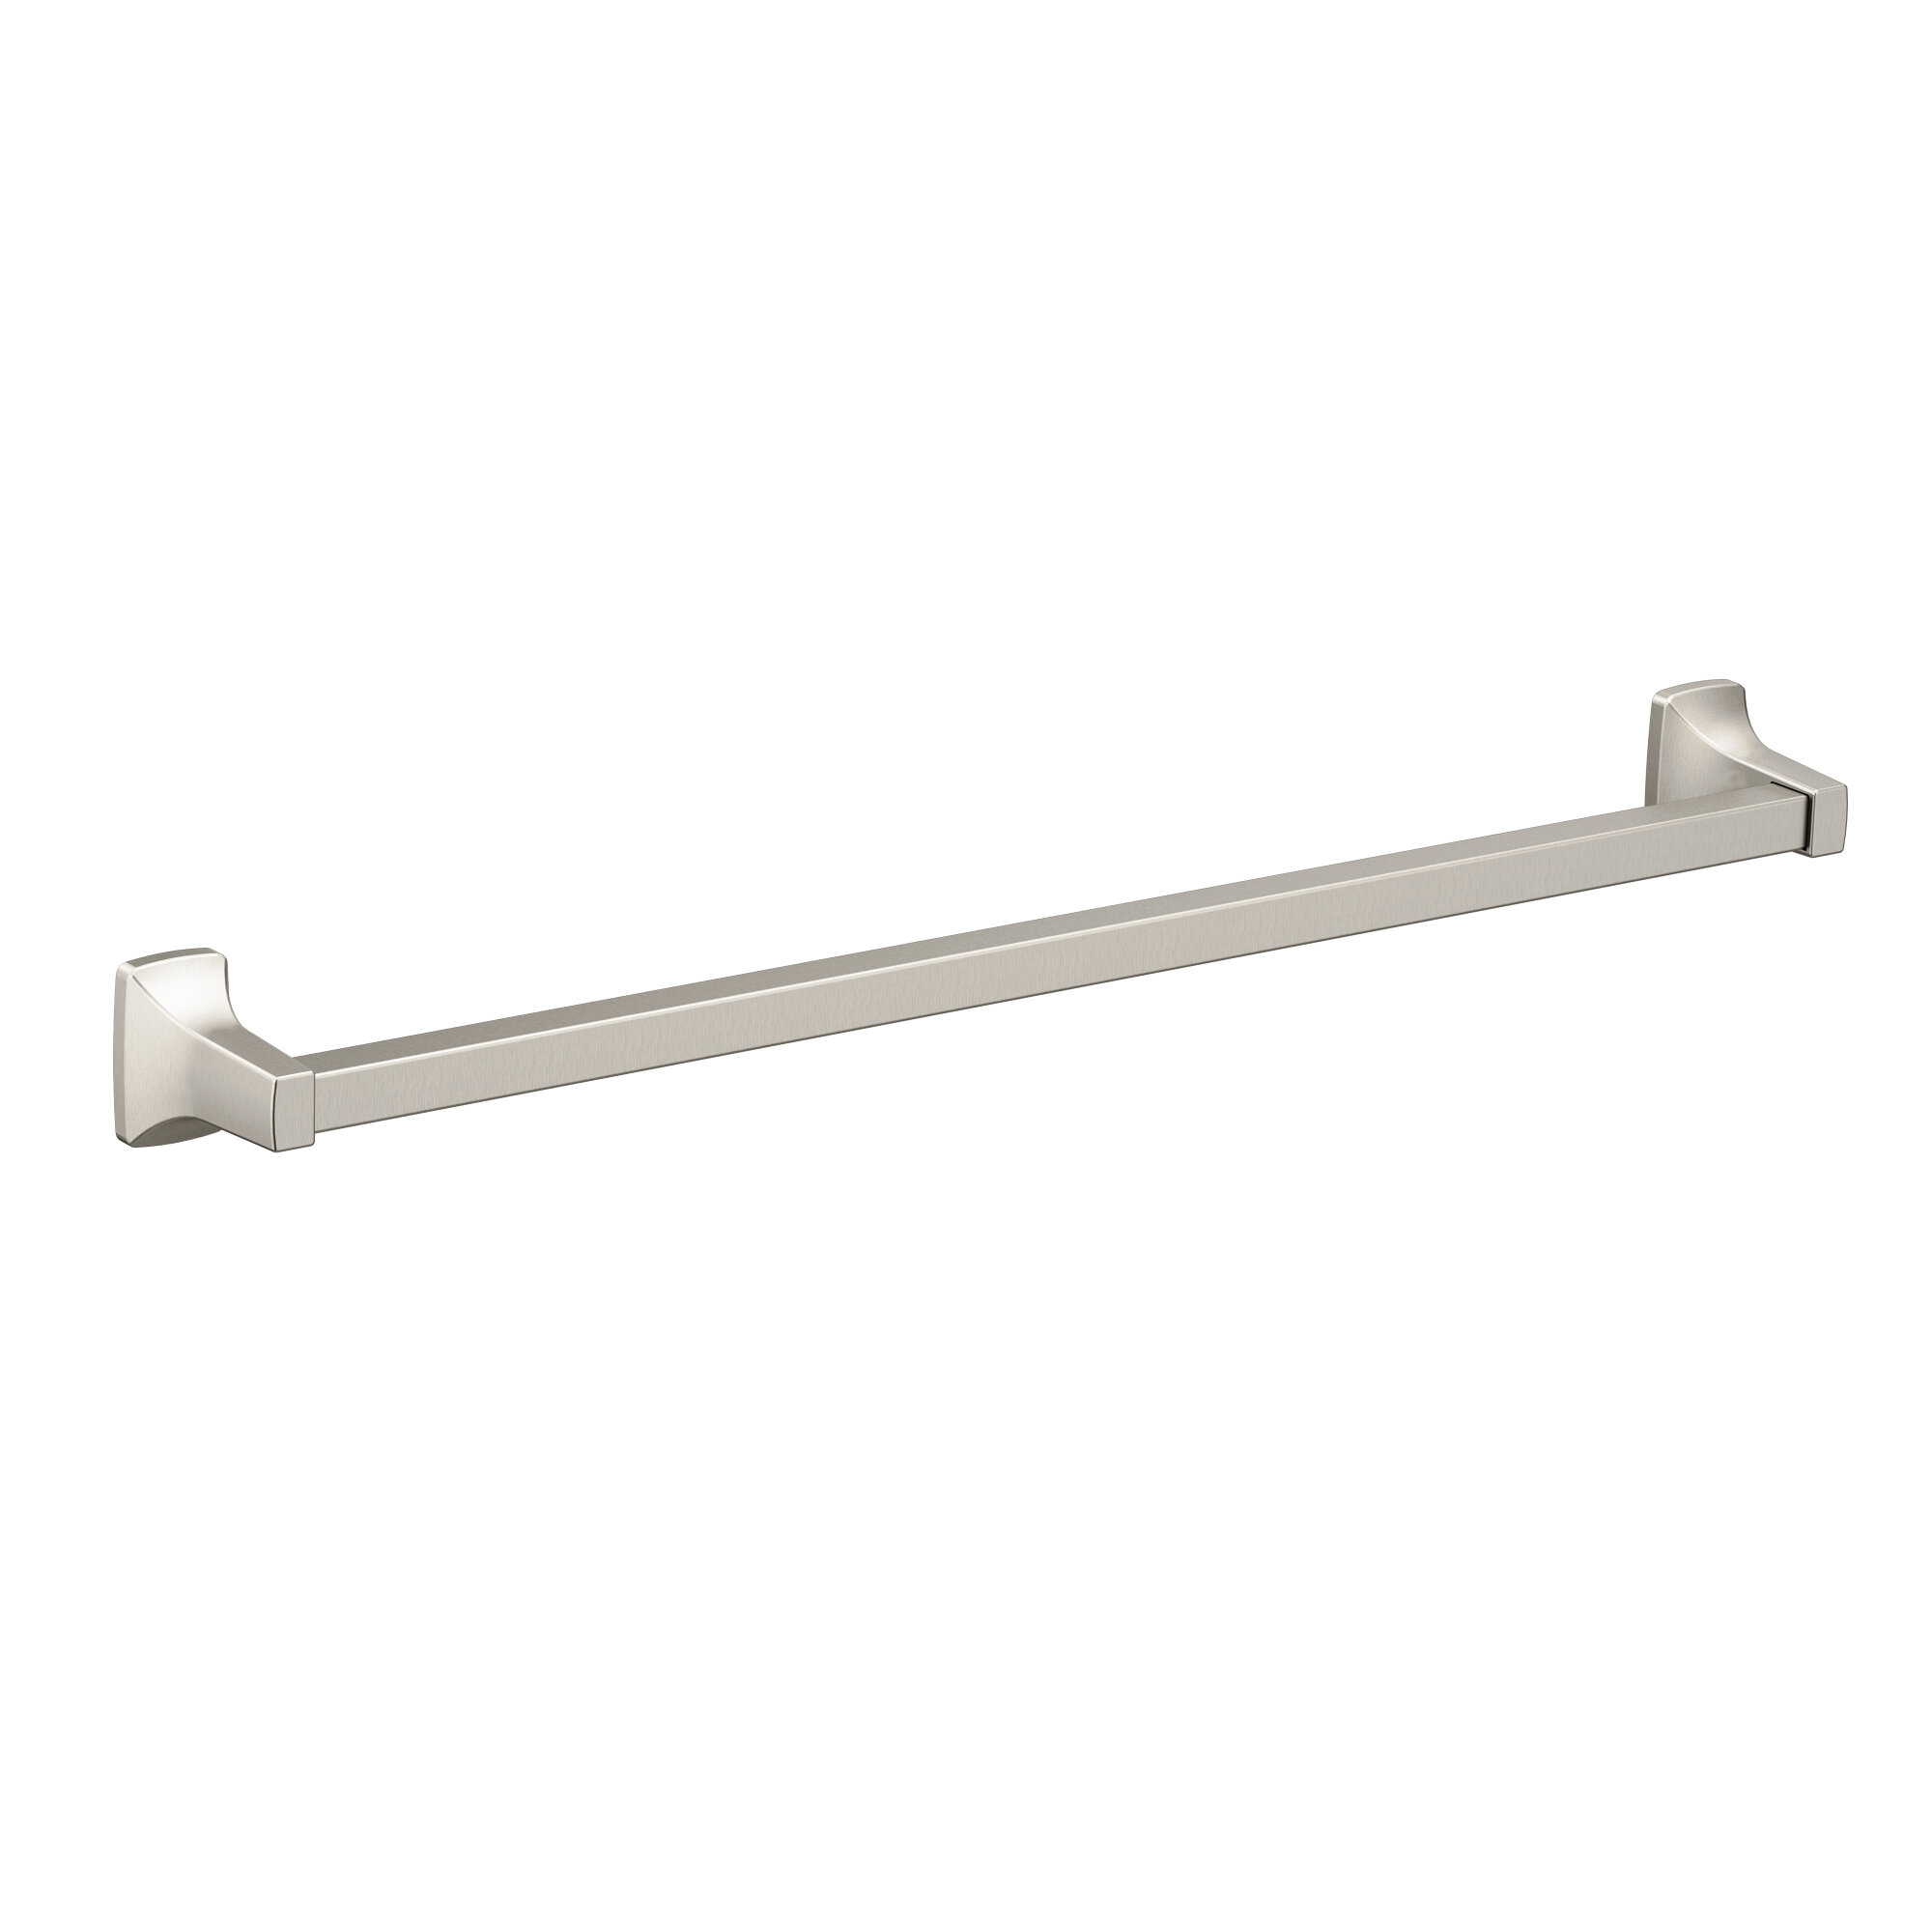 Donner Contemporary 24 Wall Mounted Towel Bar